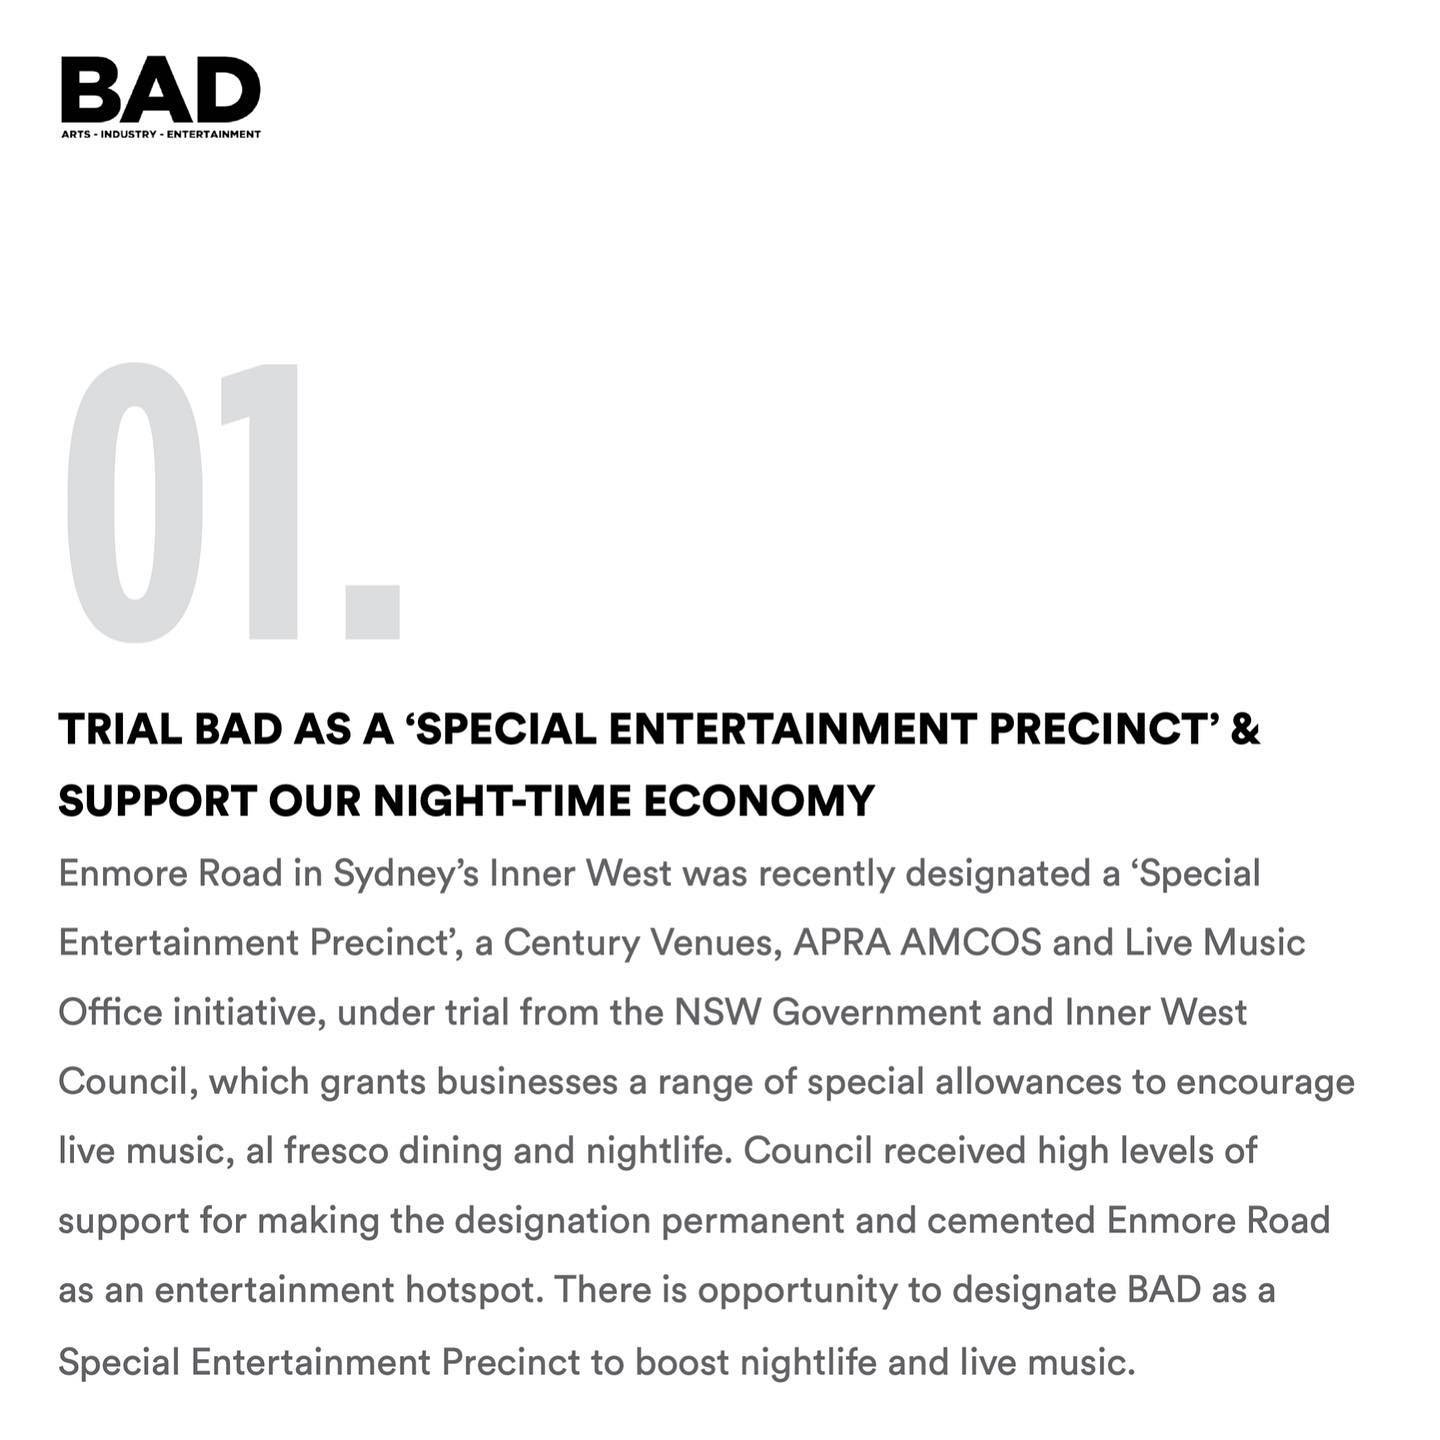 In February 2023 BAD published 10 IDEAS in its Response Submission to the NB Council Brookvale Structure Plan 

Number 1 recommendation was to TRIAL BAD AS A SPECIAL ENTERTAINMENT PRECINCT

So we&rsquo;ve been celebrating the initiative of Mayor Sue 